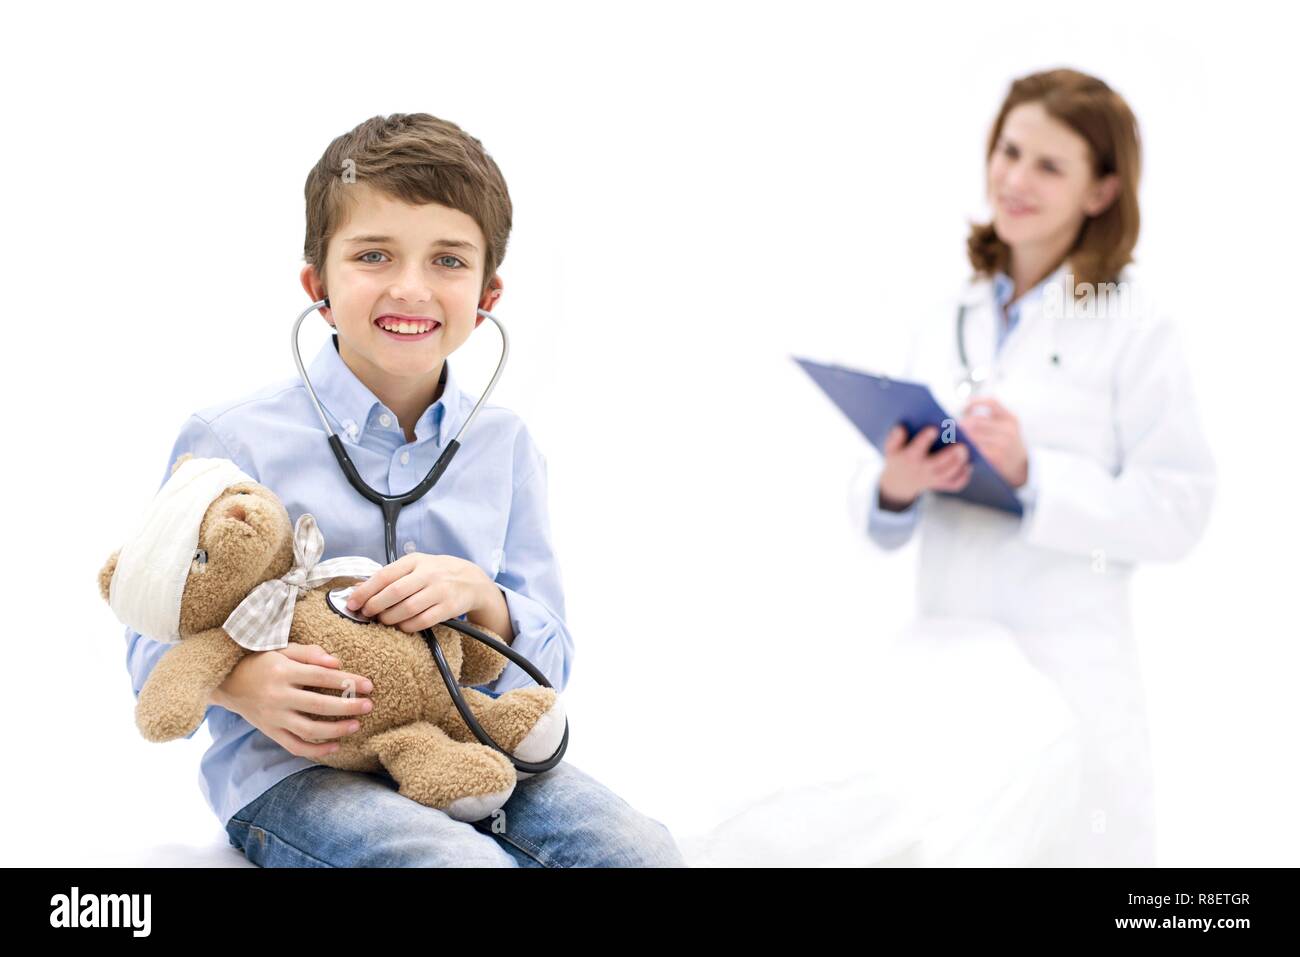 Boy role playing with teddy bear and stethoscope with doctor in background. Stock Photo